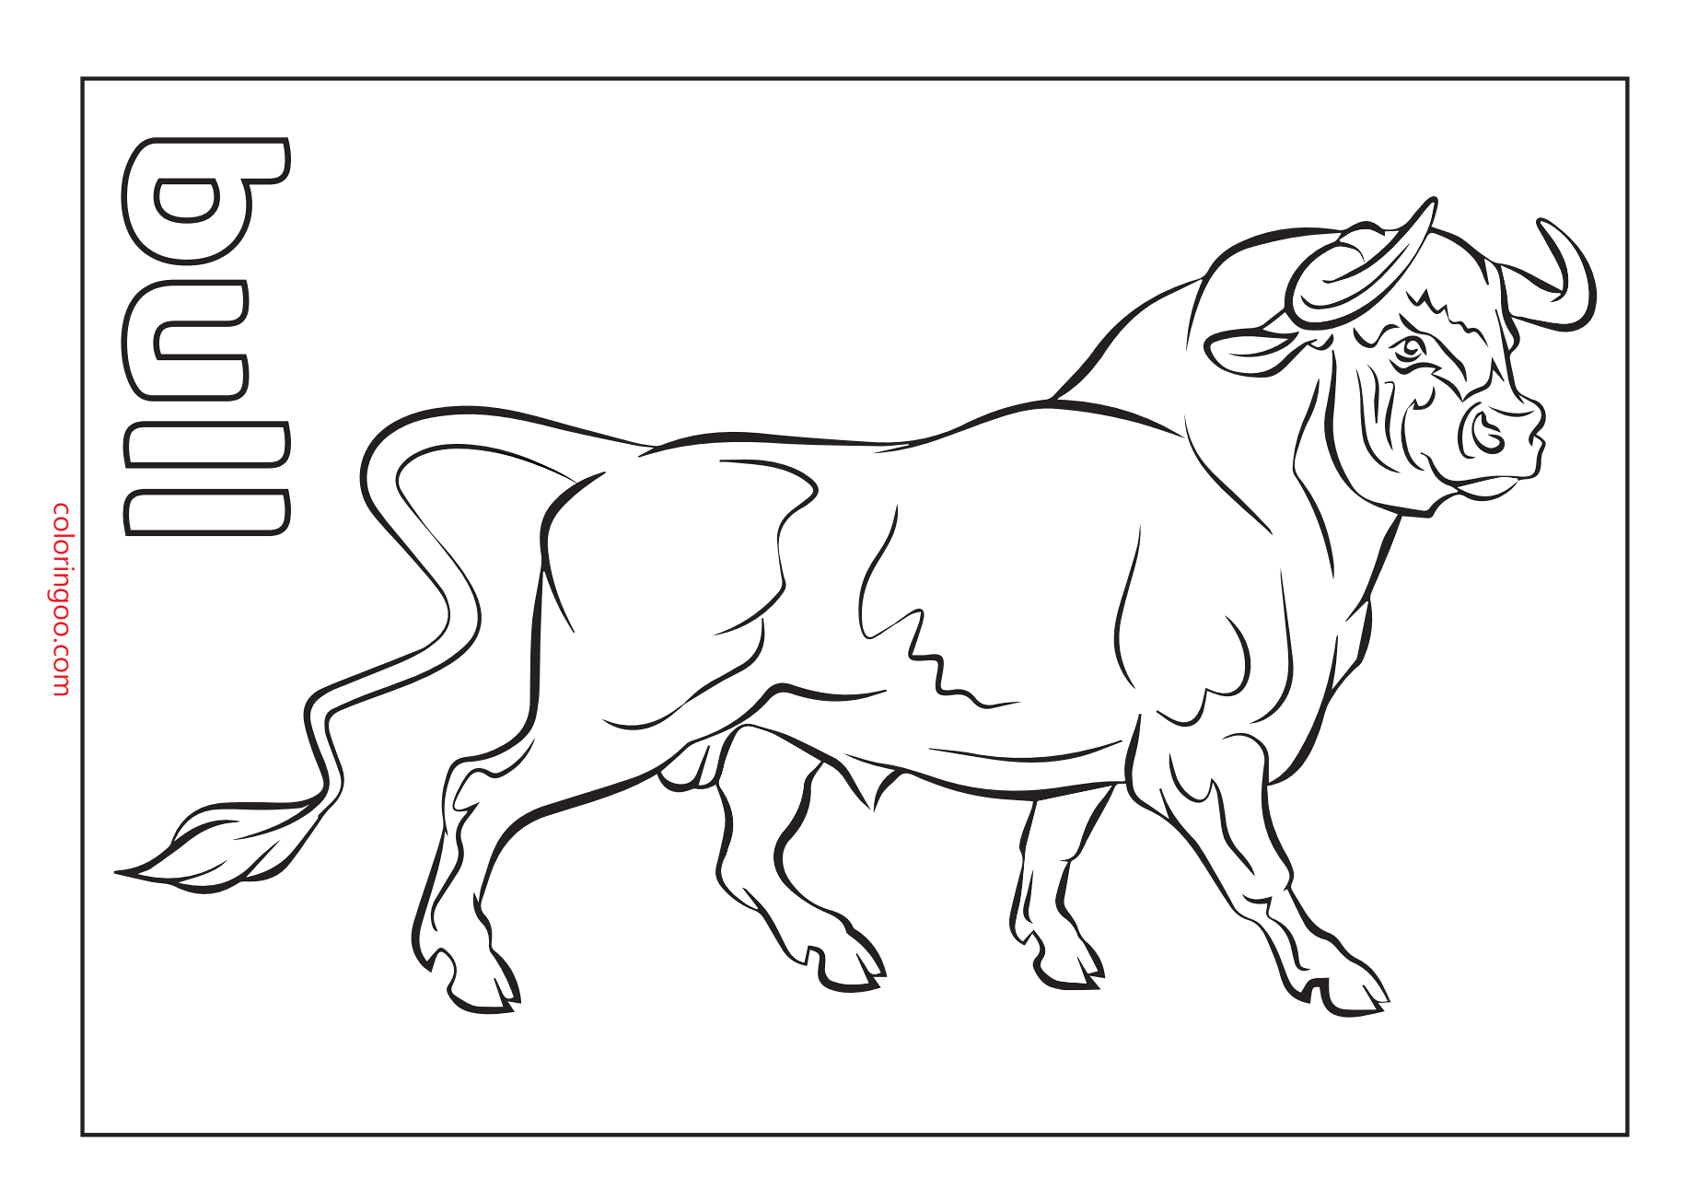 Printable Bull Coloring Page (PDF) for Kids